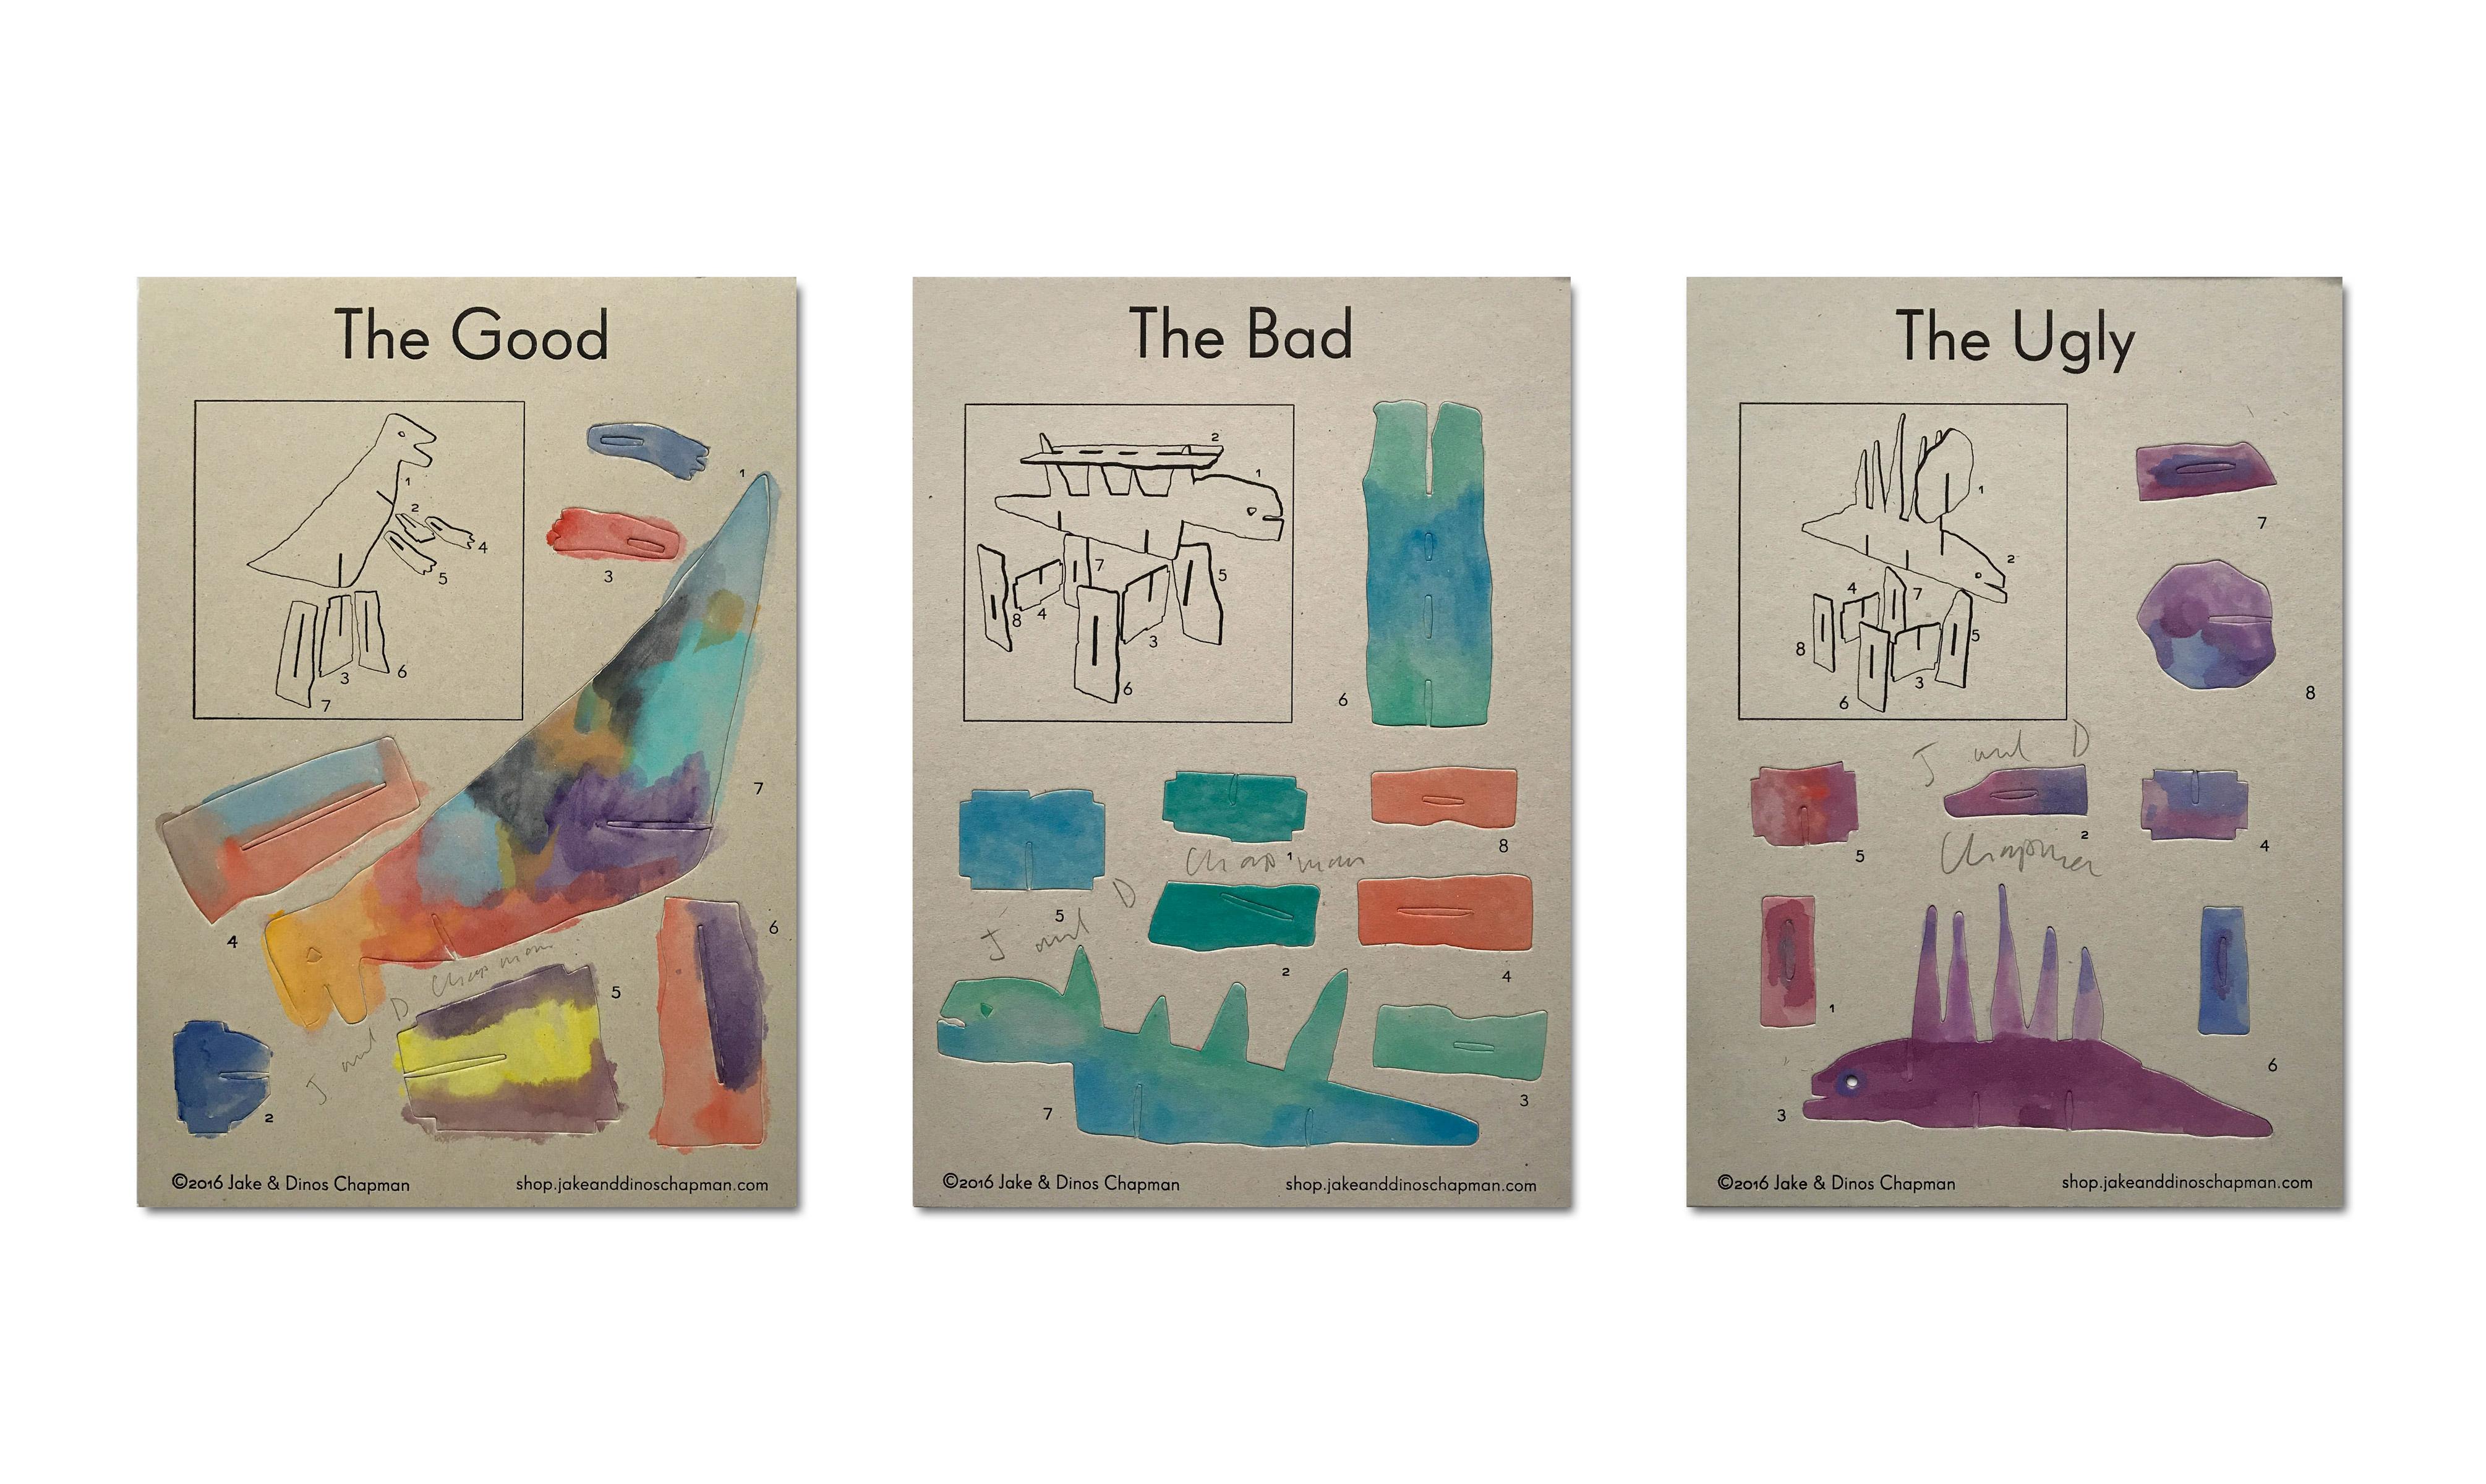 For sale, is a tryptic of signed, unique hand-painted cardboard Dinosaurs, titled 'The Good', 'The Bad' and 'The Ugly' by Jake and Dinos Chapman.

These unique hand water-coloured cardboard (painted on both sides) works by renowned British artists,